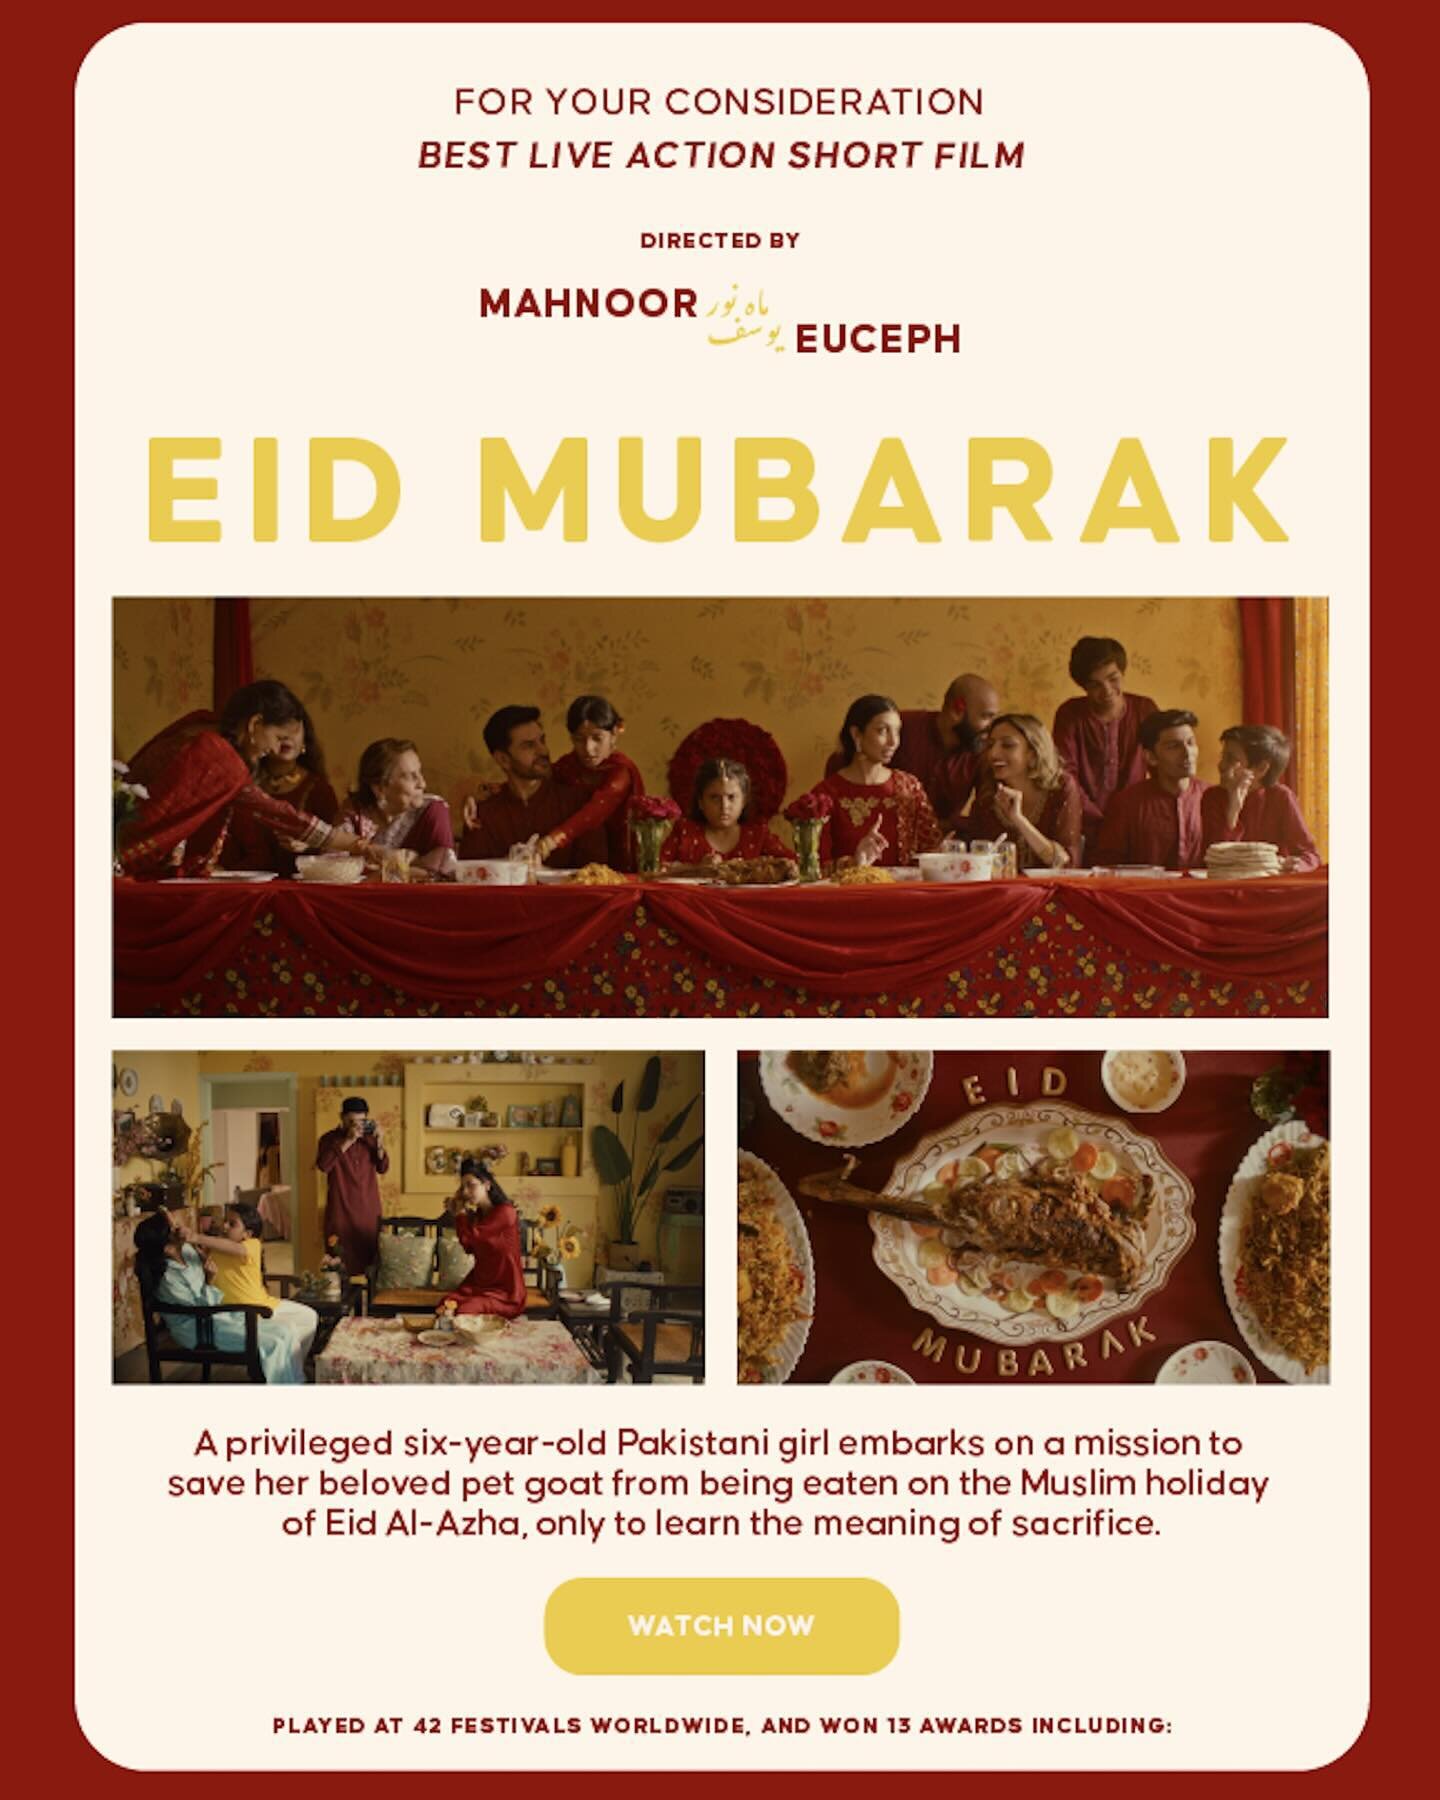 FYC: Eid Mubarak | Best Live Action Short

Voting for the Academy Awards is underway! Anyone in @theacademy can opt in and vote for our little labor of love, EID MUBARAK.

Movies can change the world. Consider voting for ours, and showing the world t